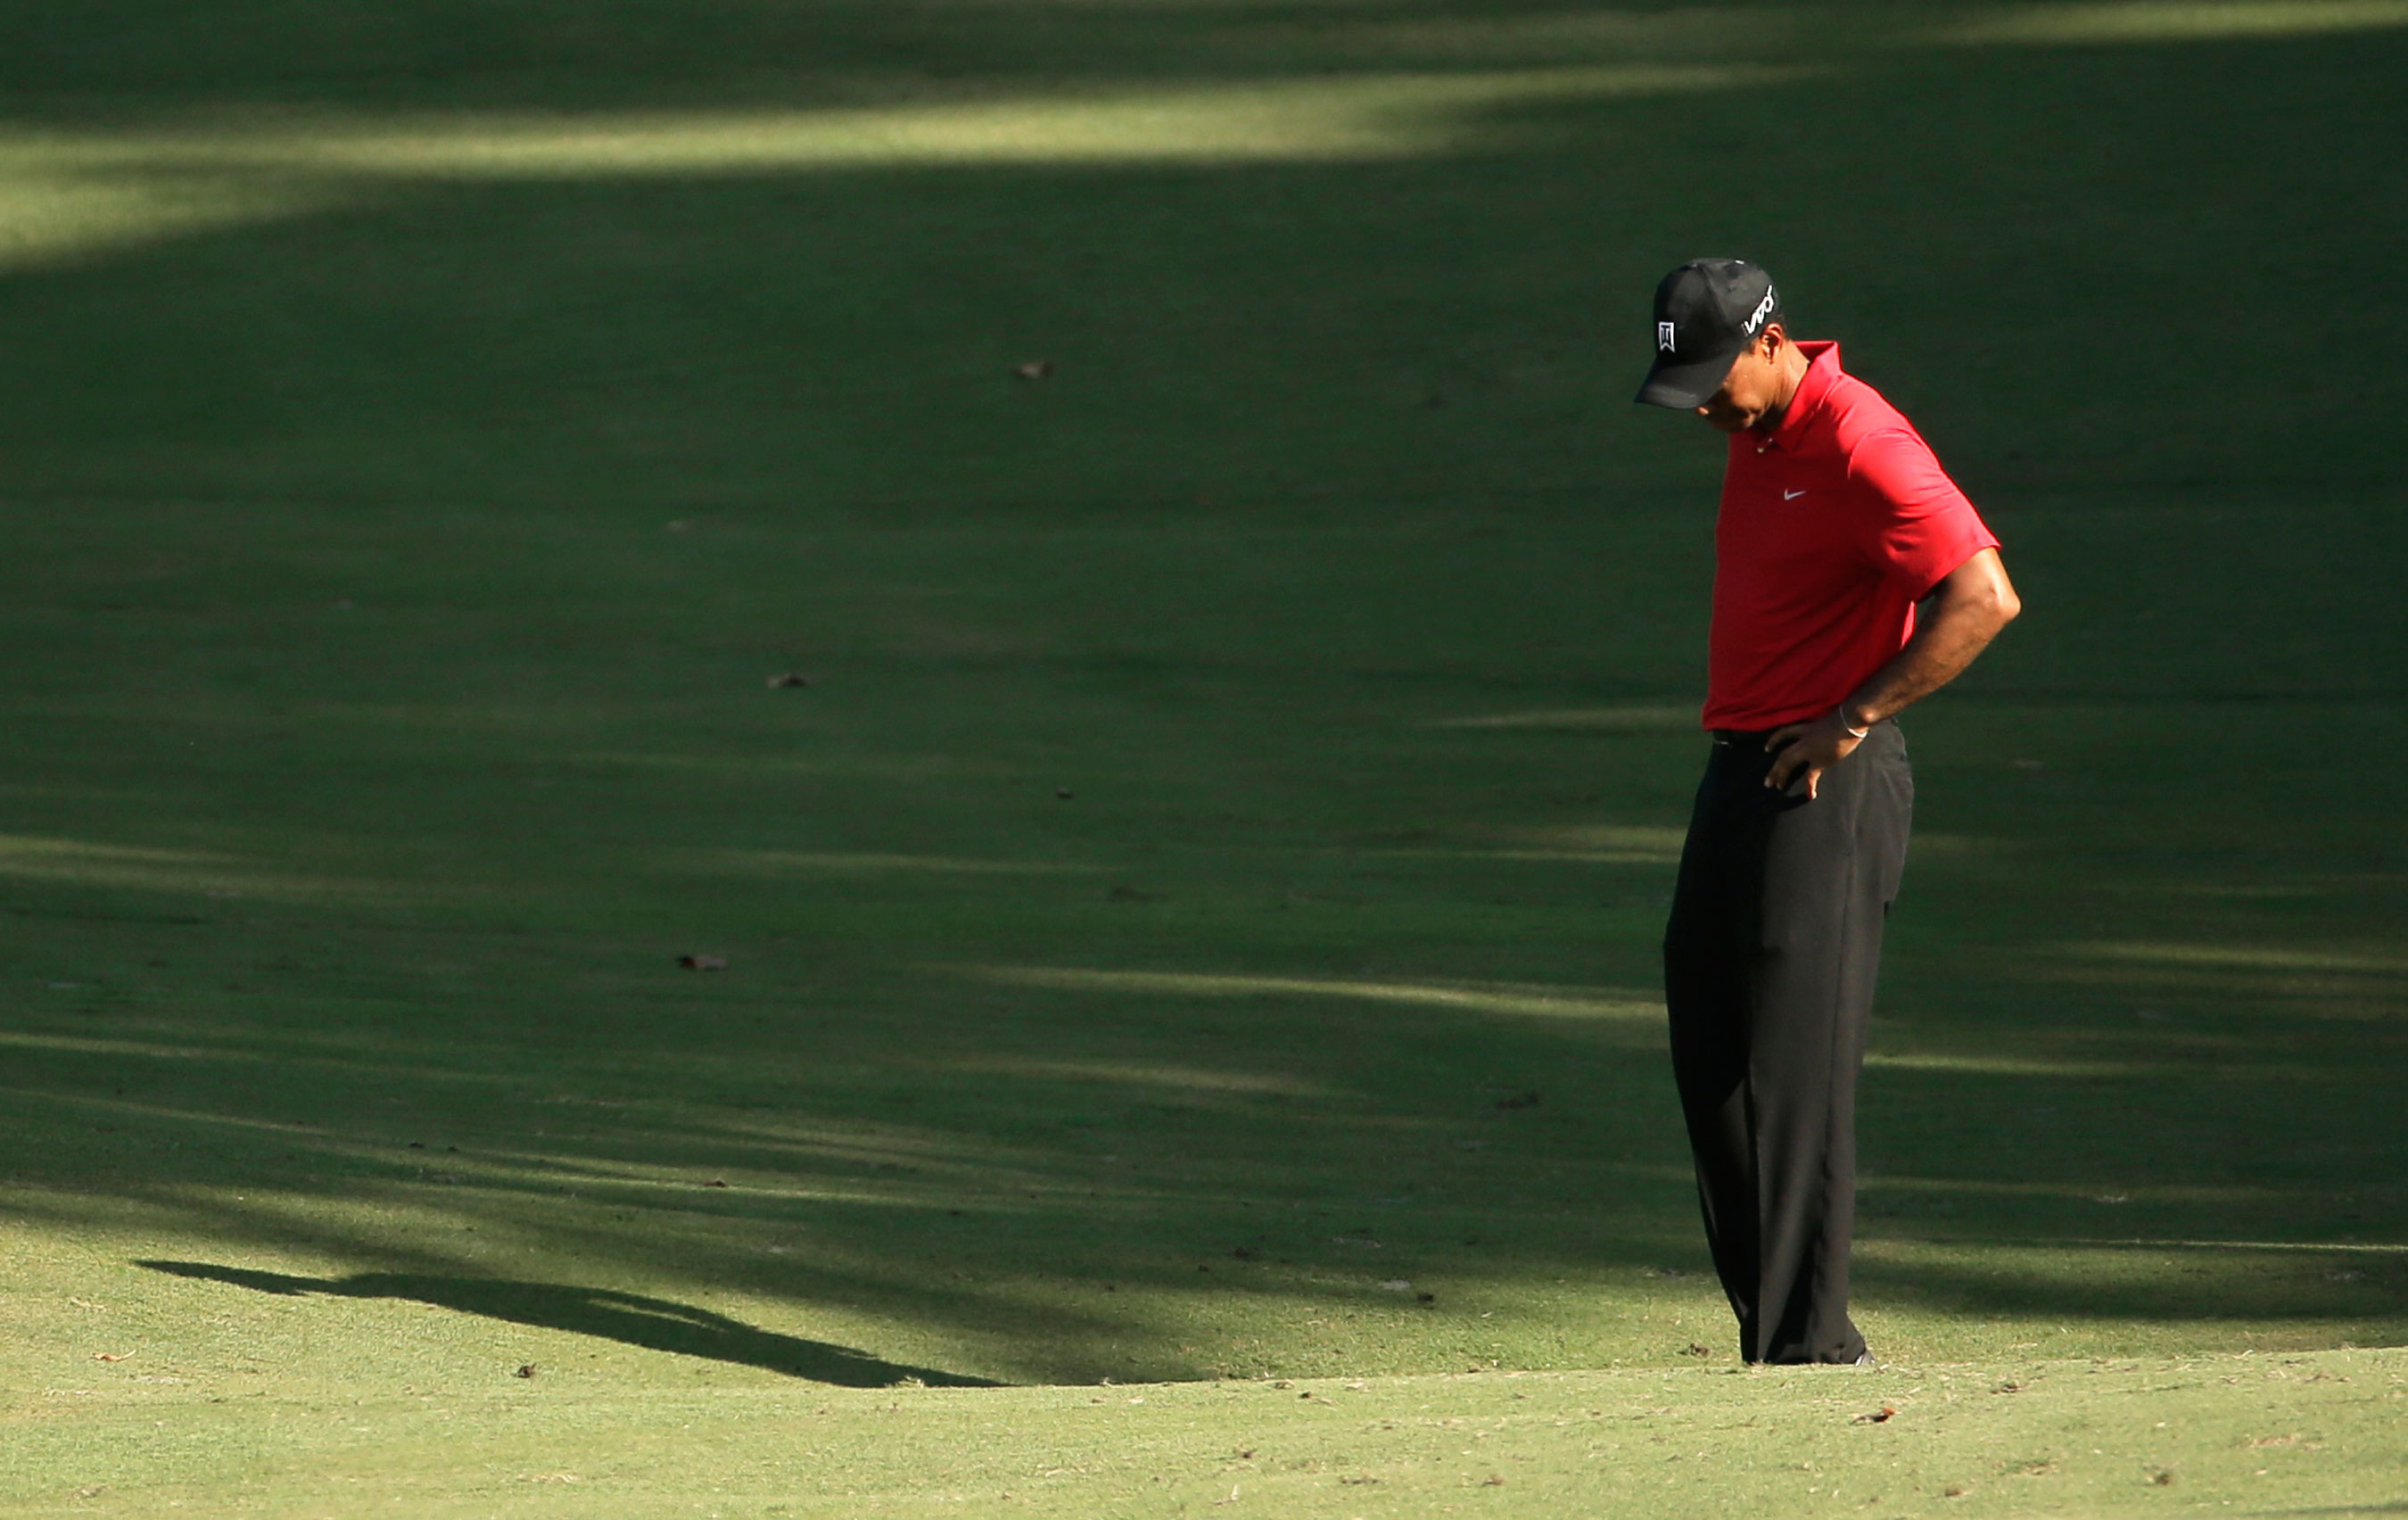 Tiger Woods sighting? Photo indicates Tiger is back on the golf